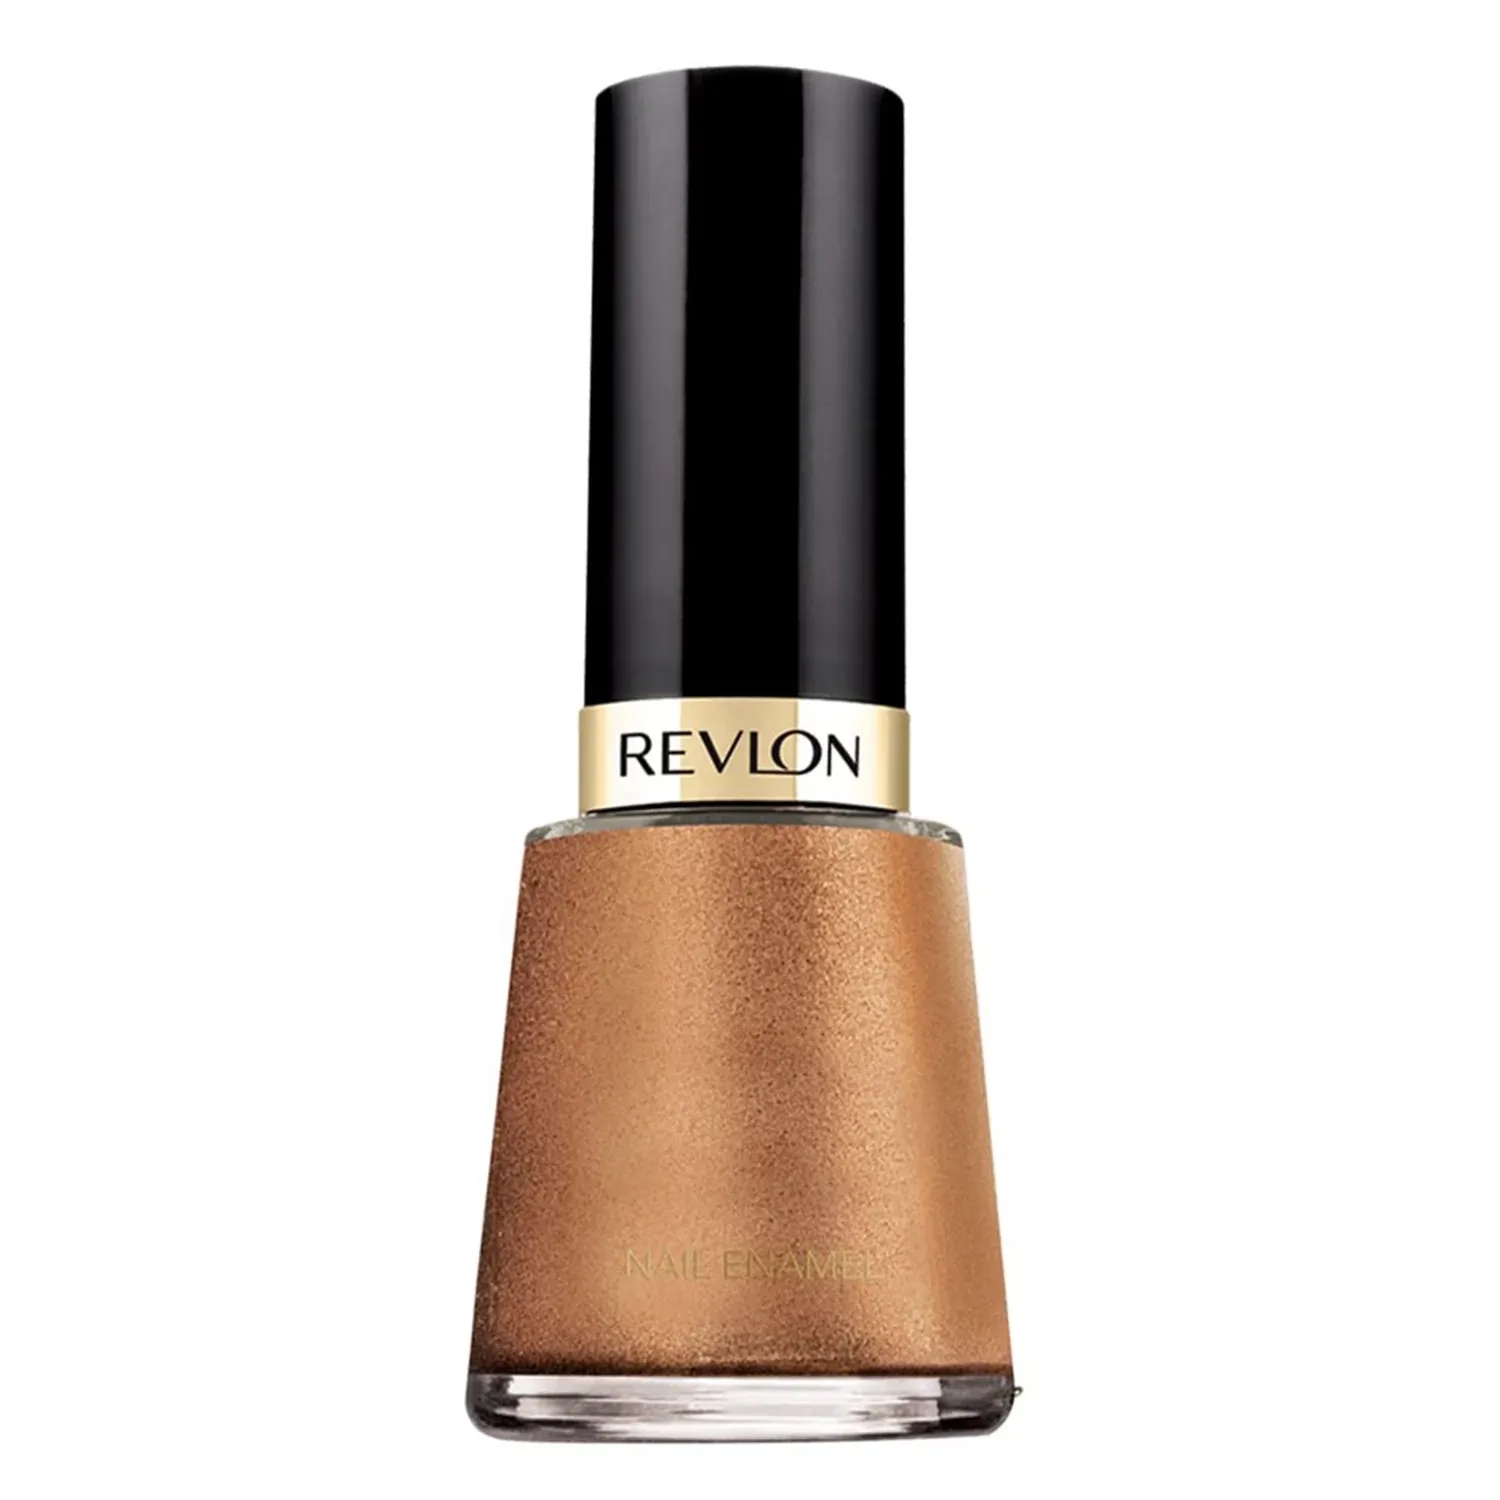 Dropship Revlon Nail Enamel - Angelic to Sell Online at a Lower Price | Doba